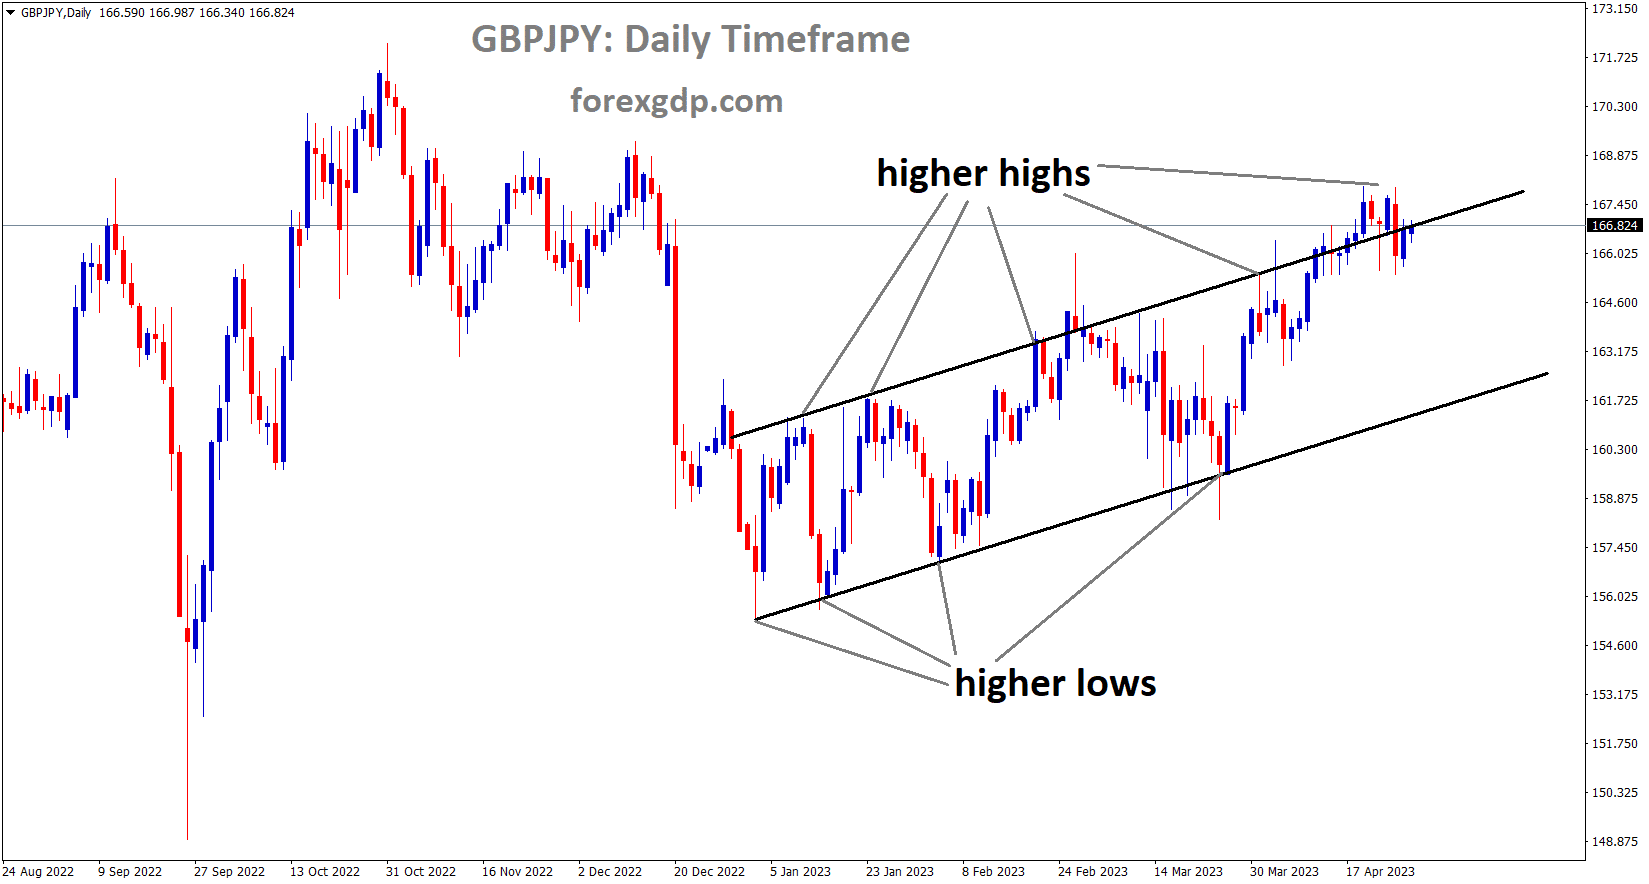 GBPJPY is moving in an Ascending channel and the market has reached the higher high area of the channel